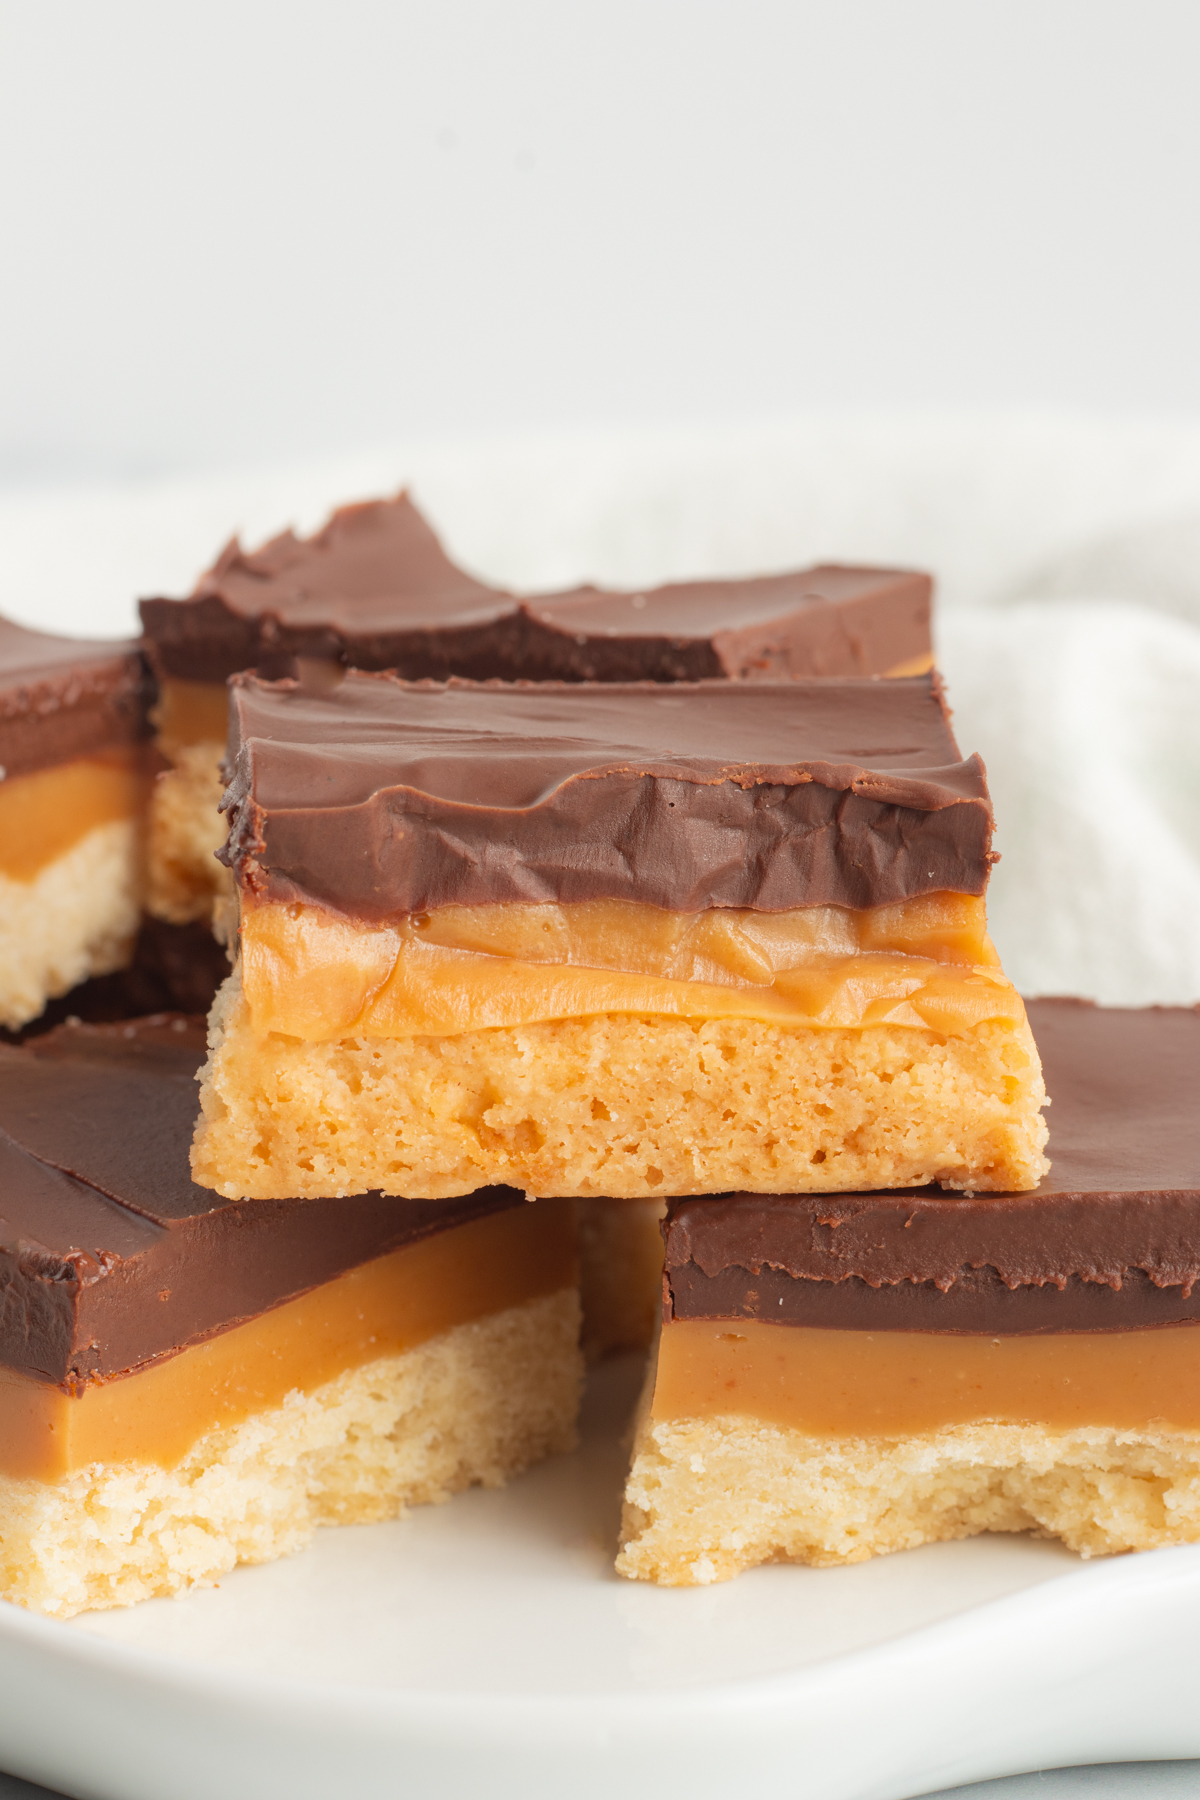 Enjoy a slice of rich, decadent Millionaire Shortbread, also known as Caramel Squares or homemade Twix Bars! This dessert contains three layers of sweetness, including buttery shortbread, gooey caramel filling, and smooth milk chocolate, just like a Twix Bar, but better! Treat yourself to a caramel square any time you want a sweet, indulgent treat! via @foodhussy